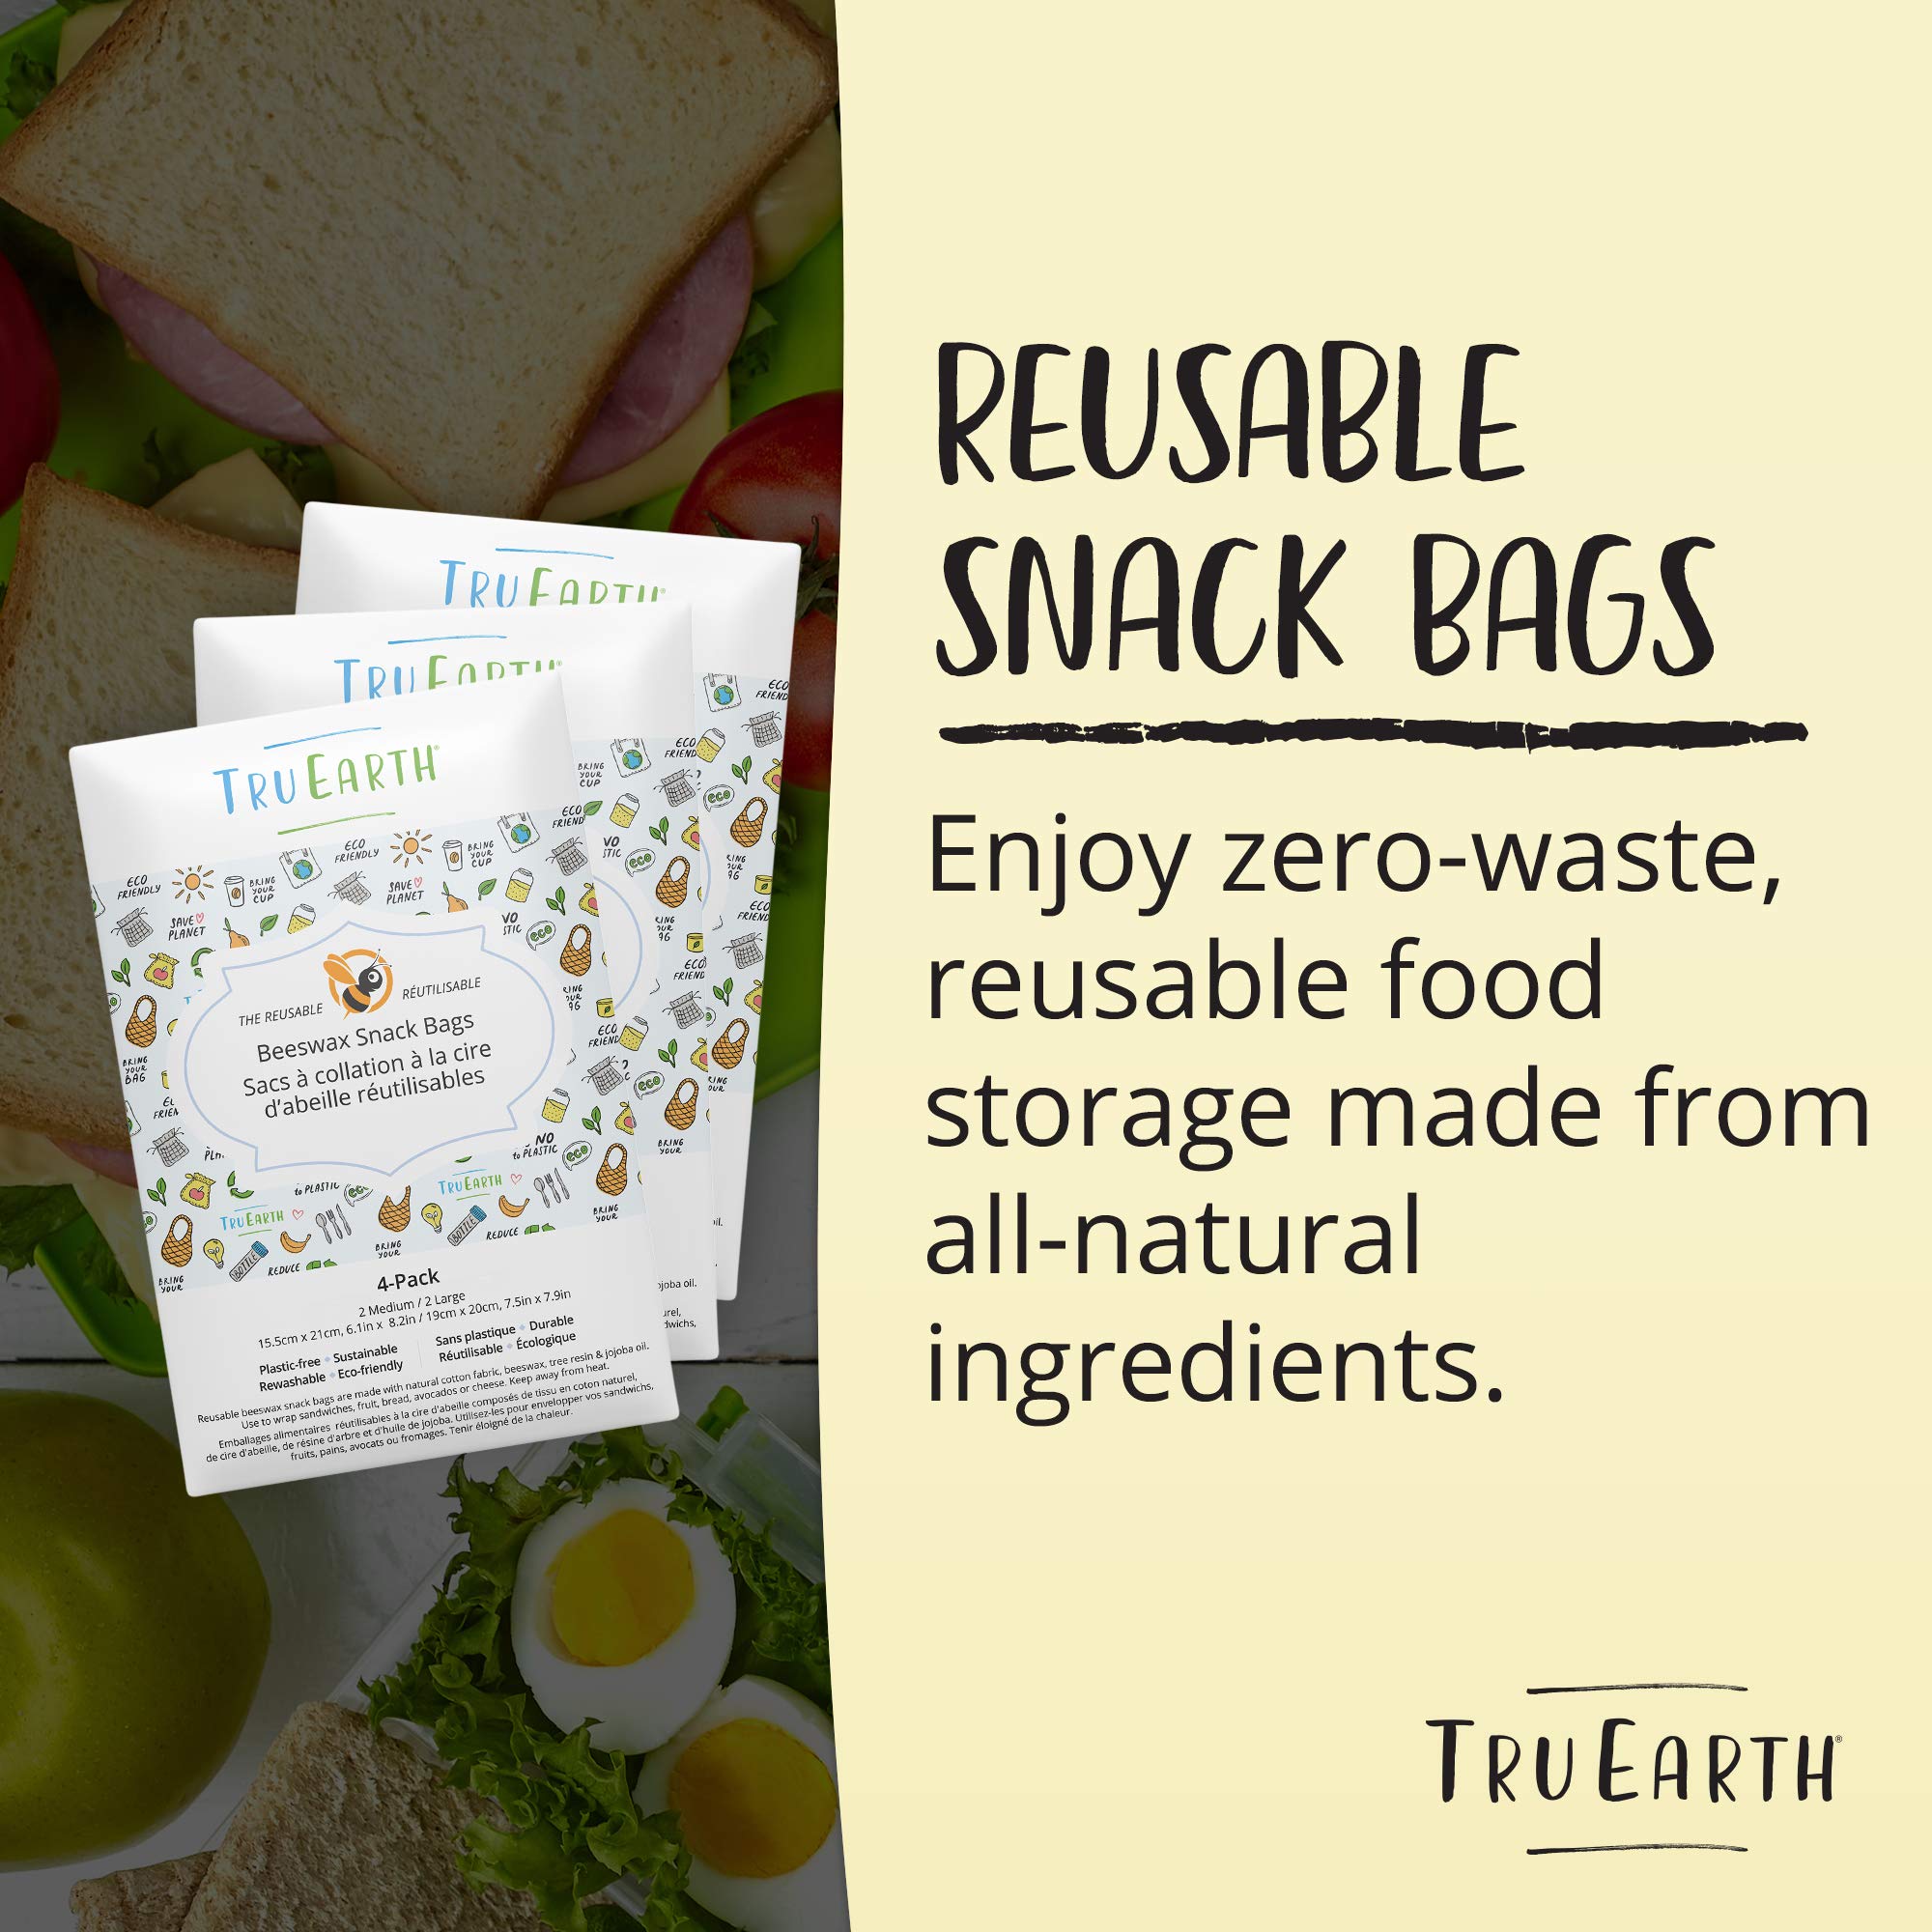 Tru Earth Beeswax Snack Bags | Reusable | Zero-Waste Beeswax | Contains 2 Medium & 2 Large Bags